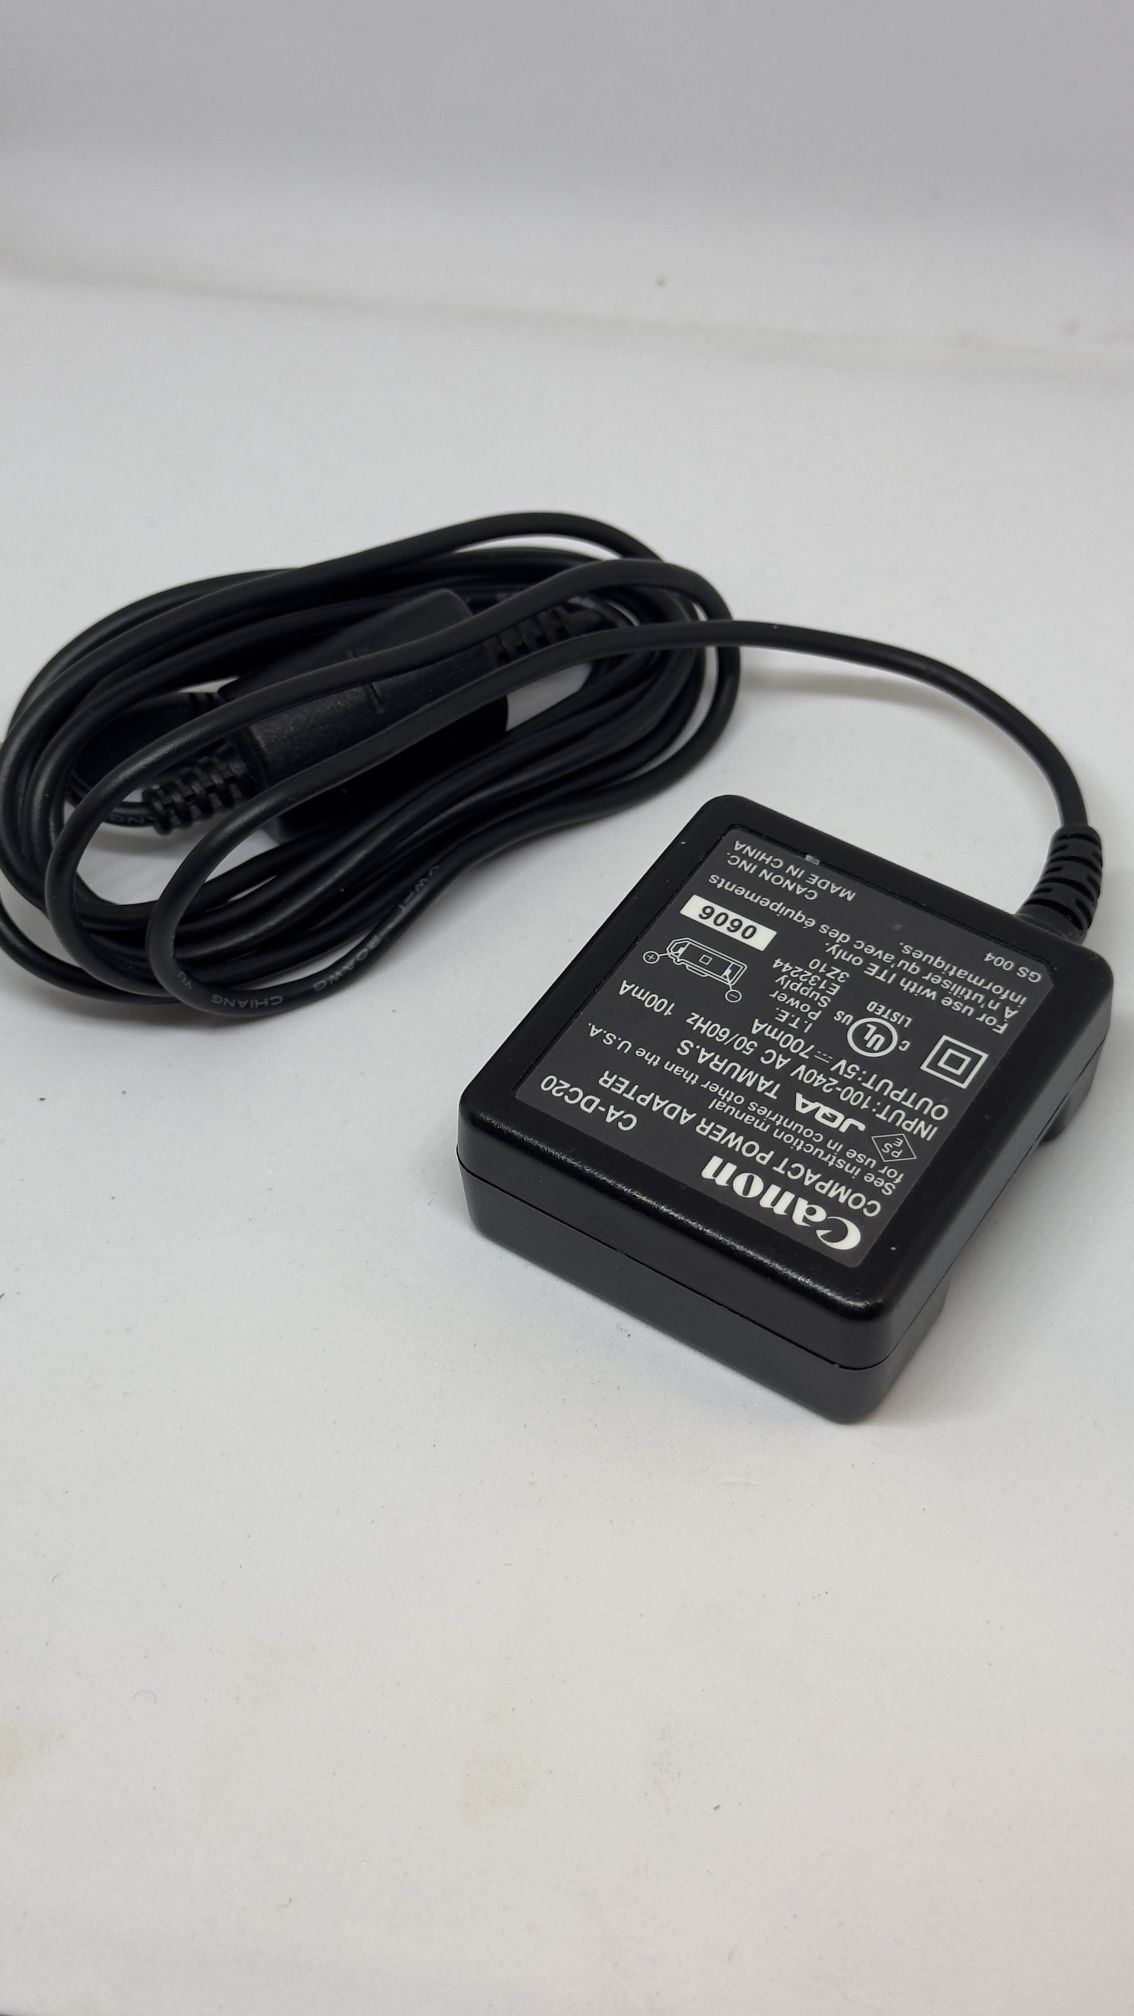 Genuine Canon CA-DC20 Compact Power Adapter 5v 700mA for Powershot SD30 SD40